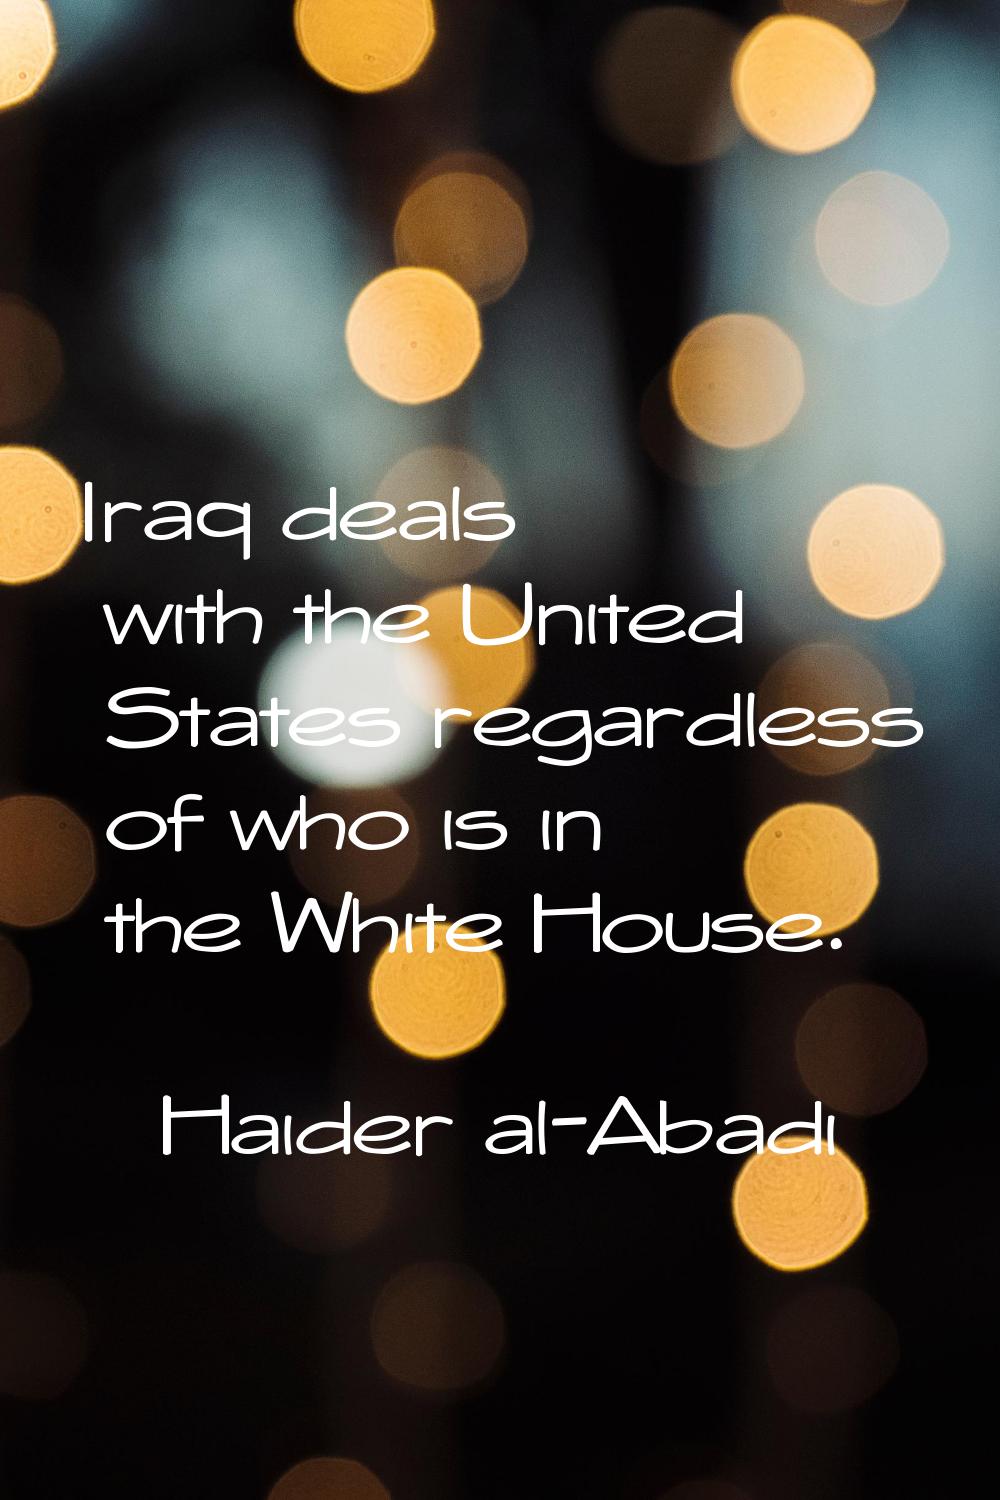 Iraq deals with the United States regardless of who is in the White House.